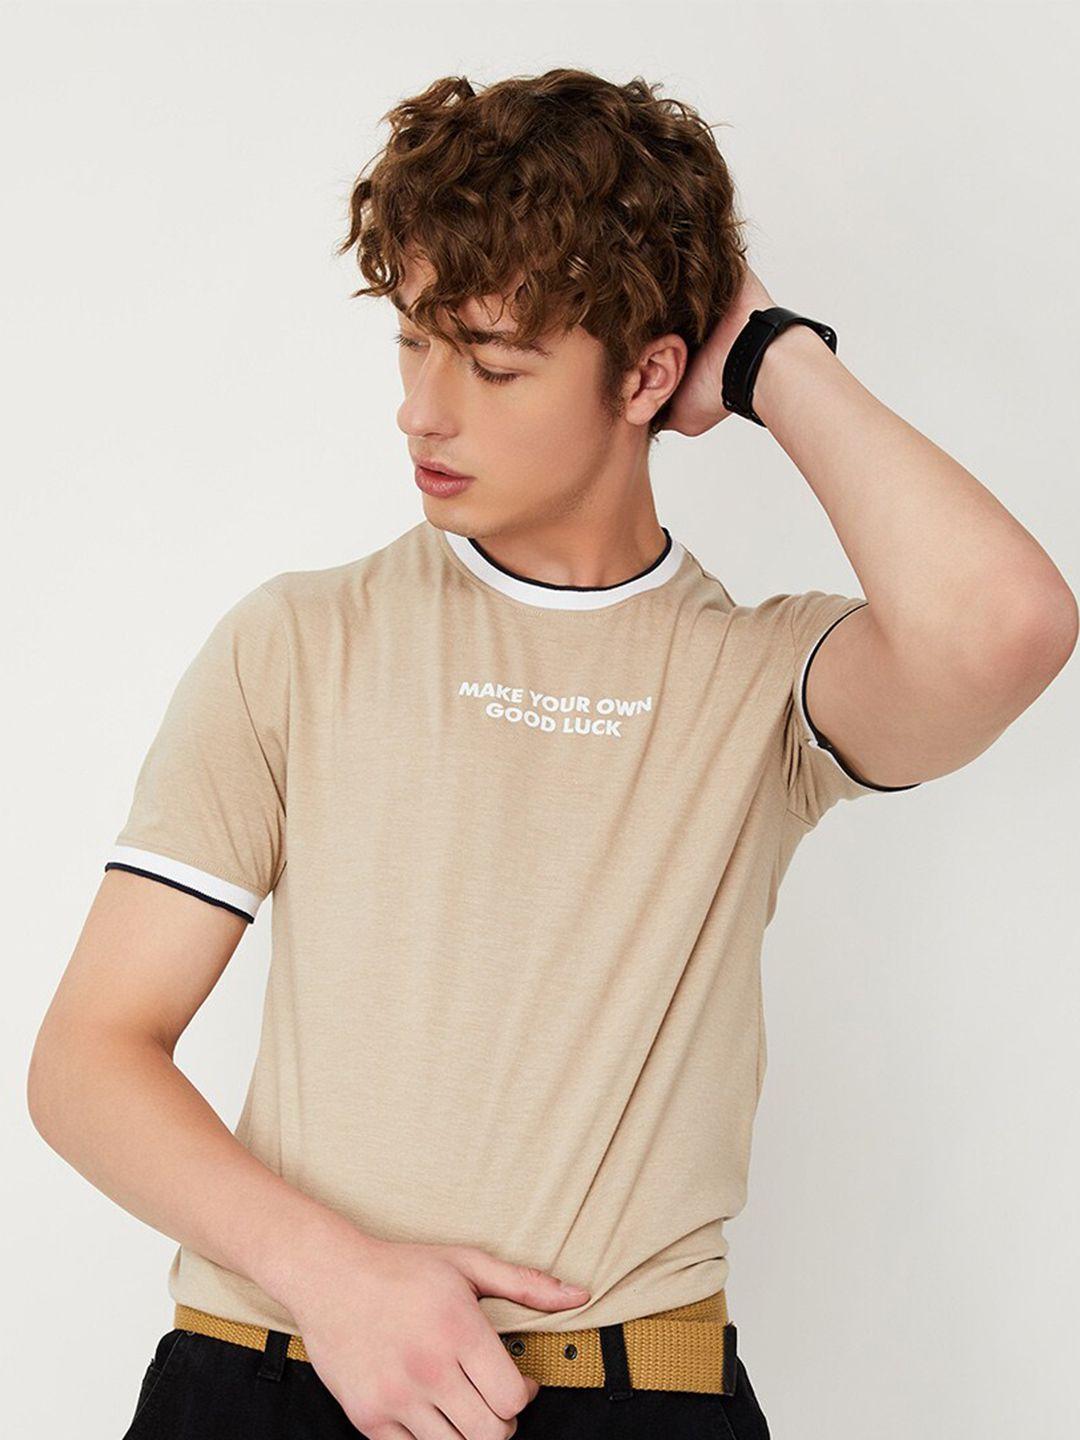 max Typography Printed Cotton T-Shirt